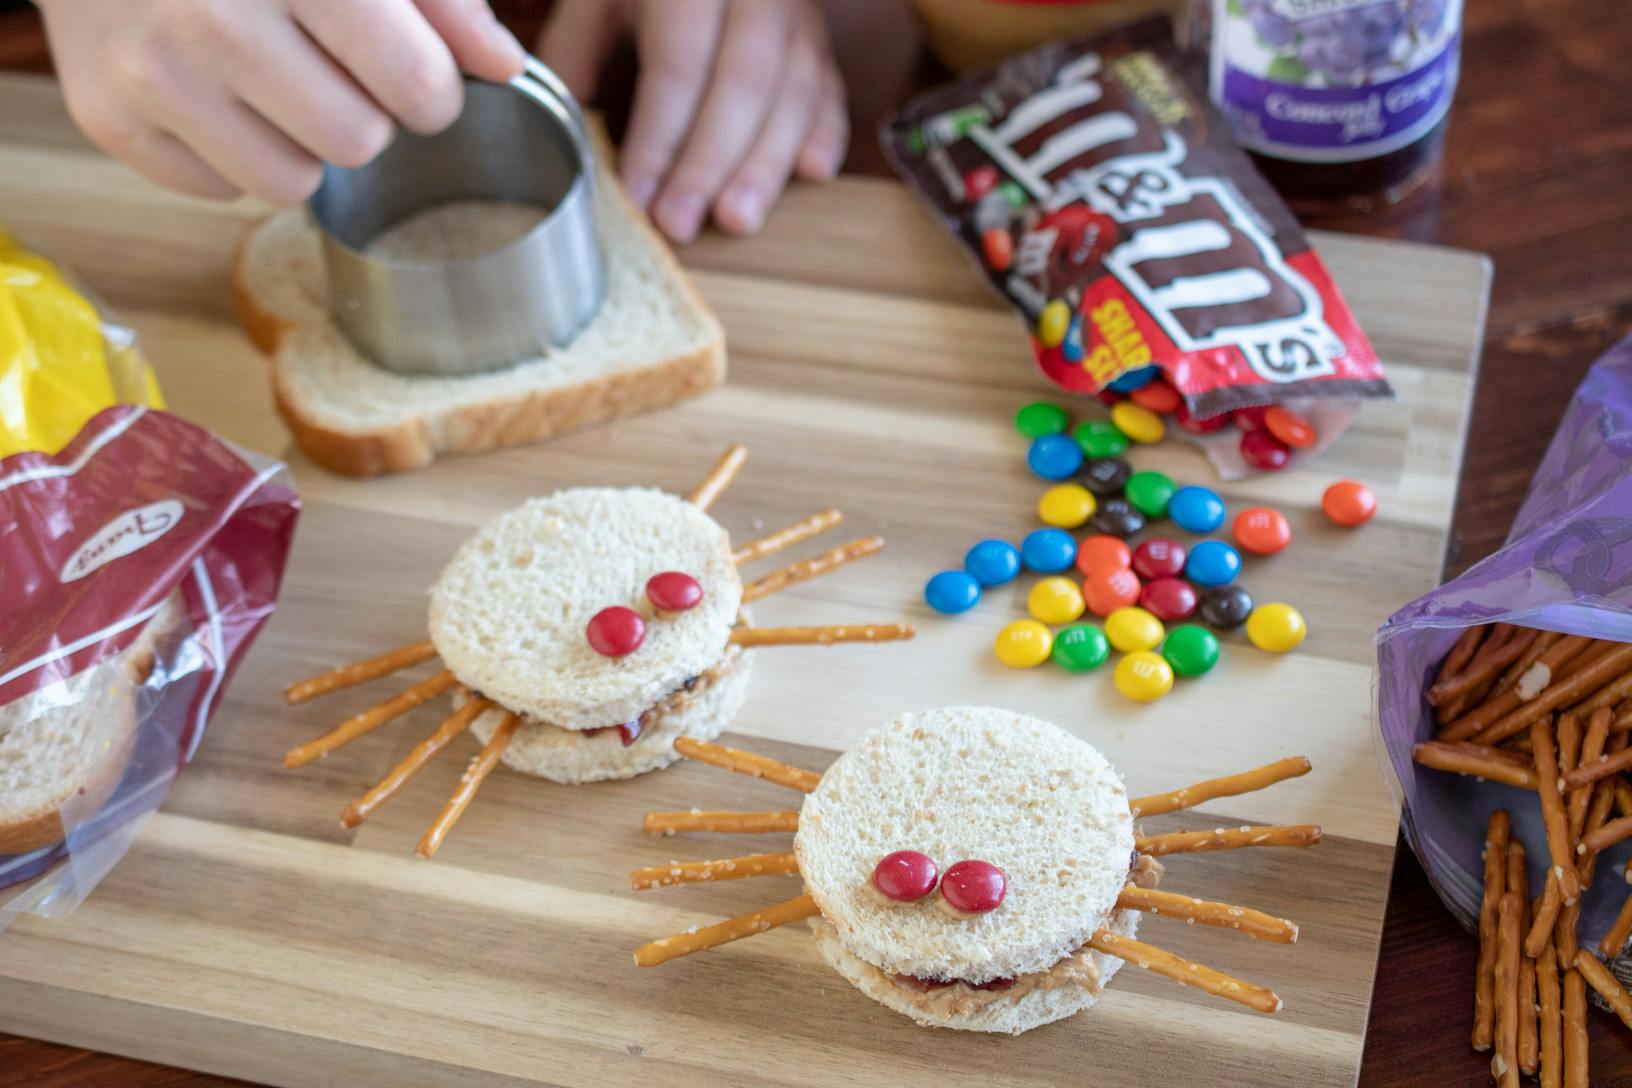 Sandwiches cut in circles with pretzel sticks and m&m's on them to make them look like spiders.